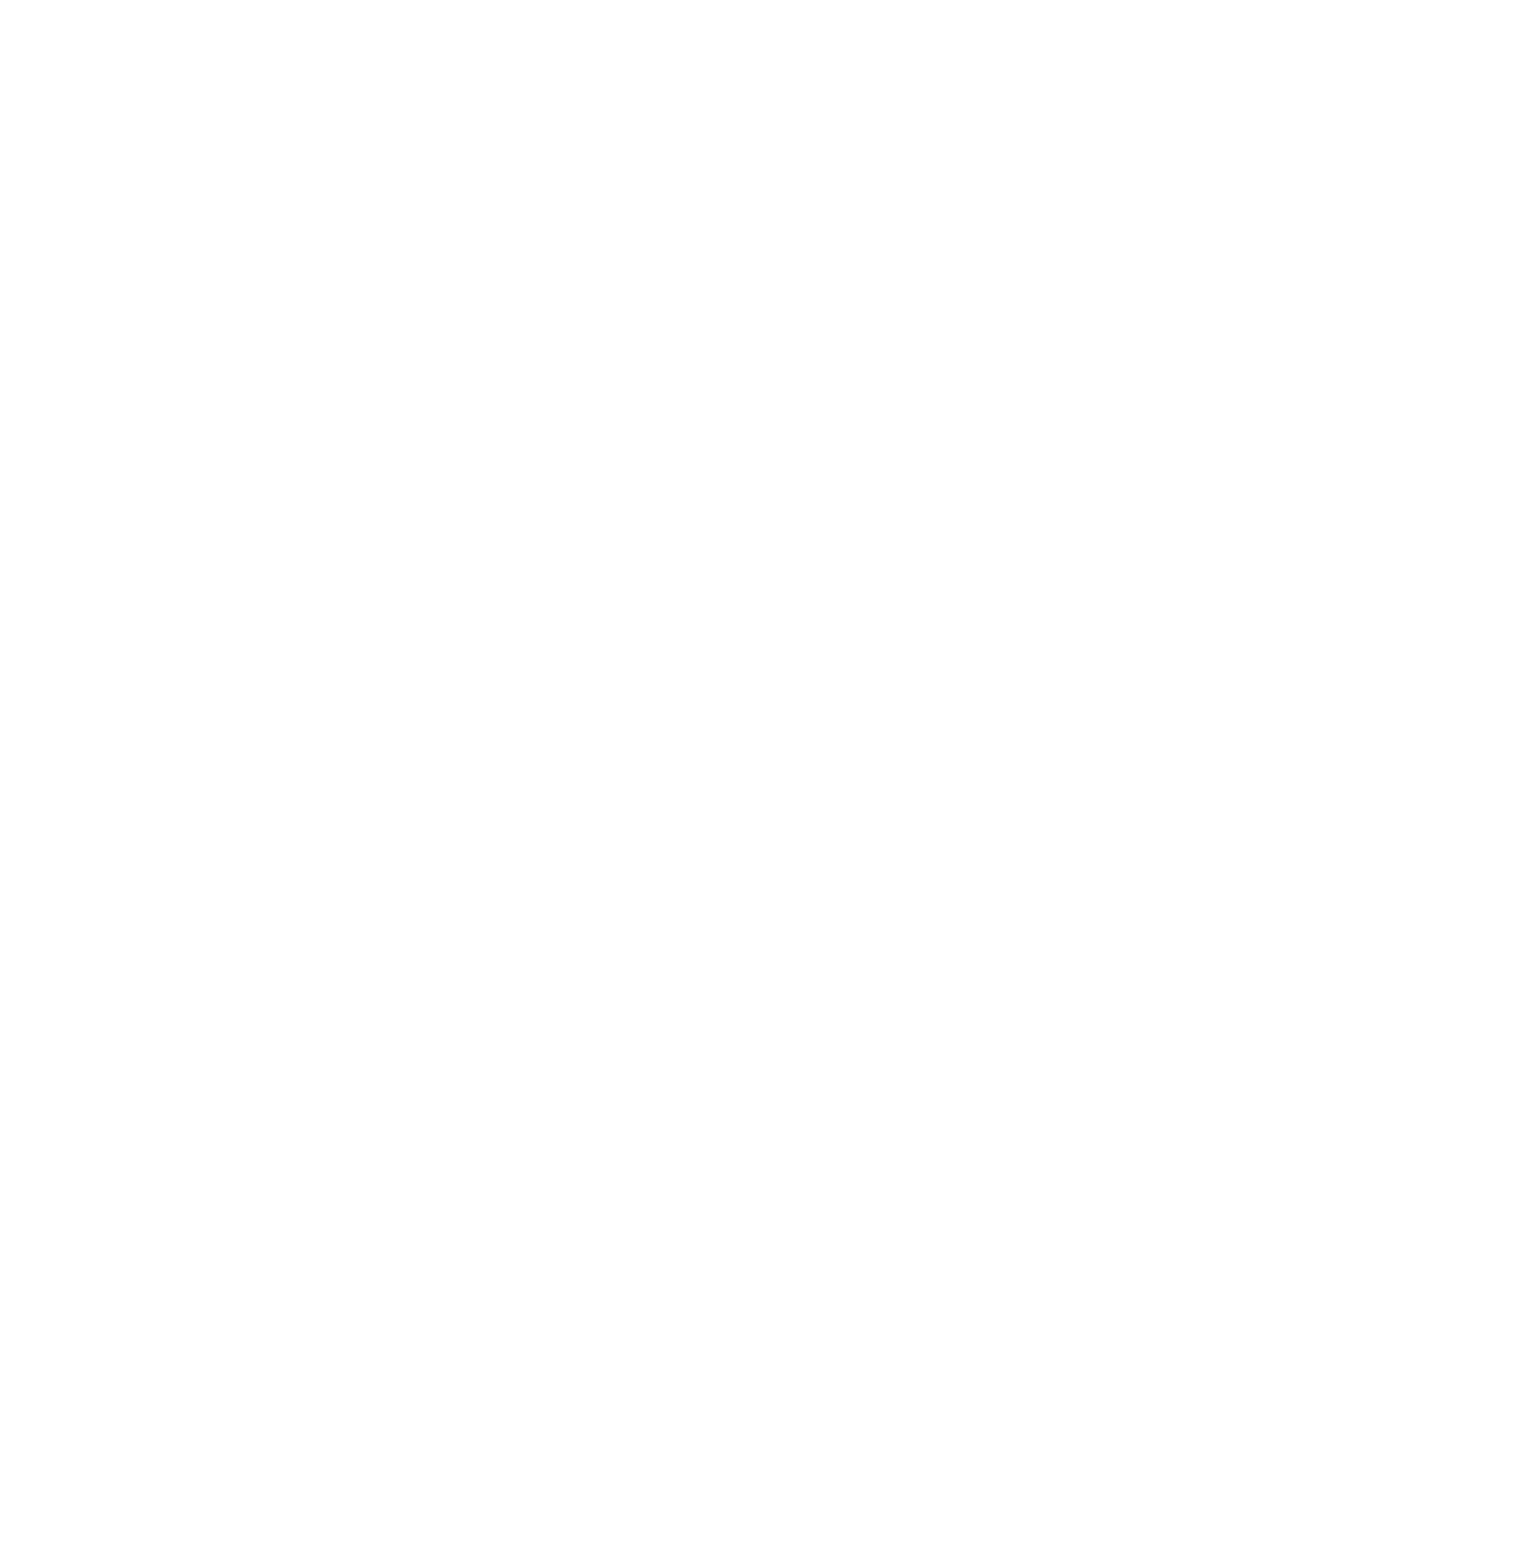 Sirius XM logo for dark backgrounds (transparent PNG)